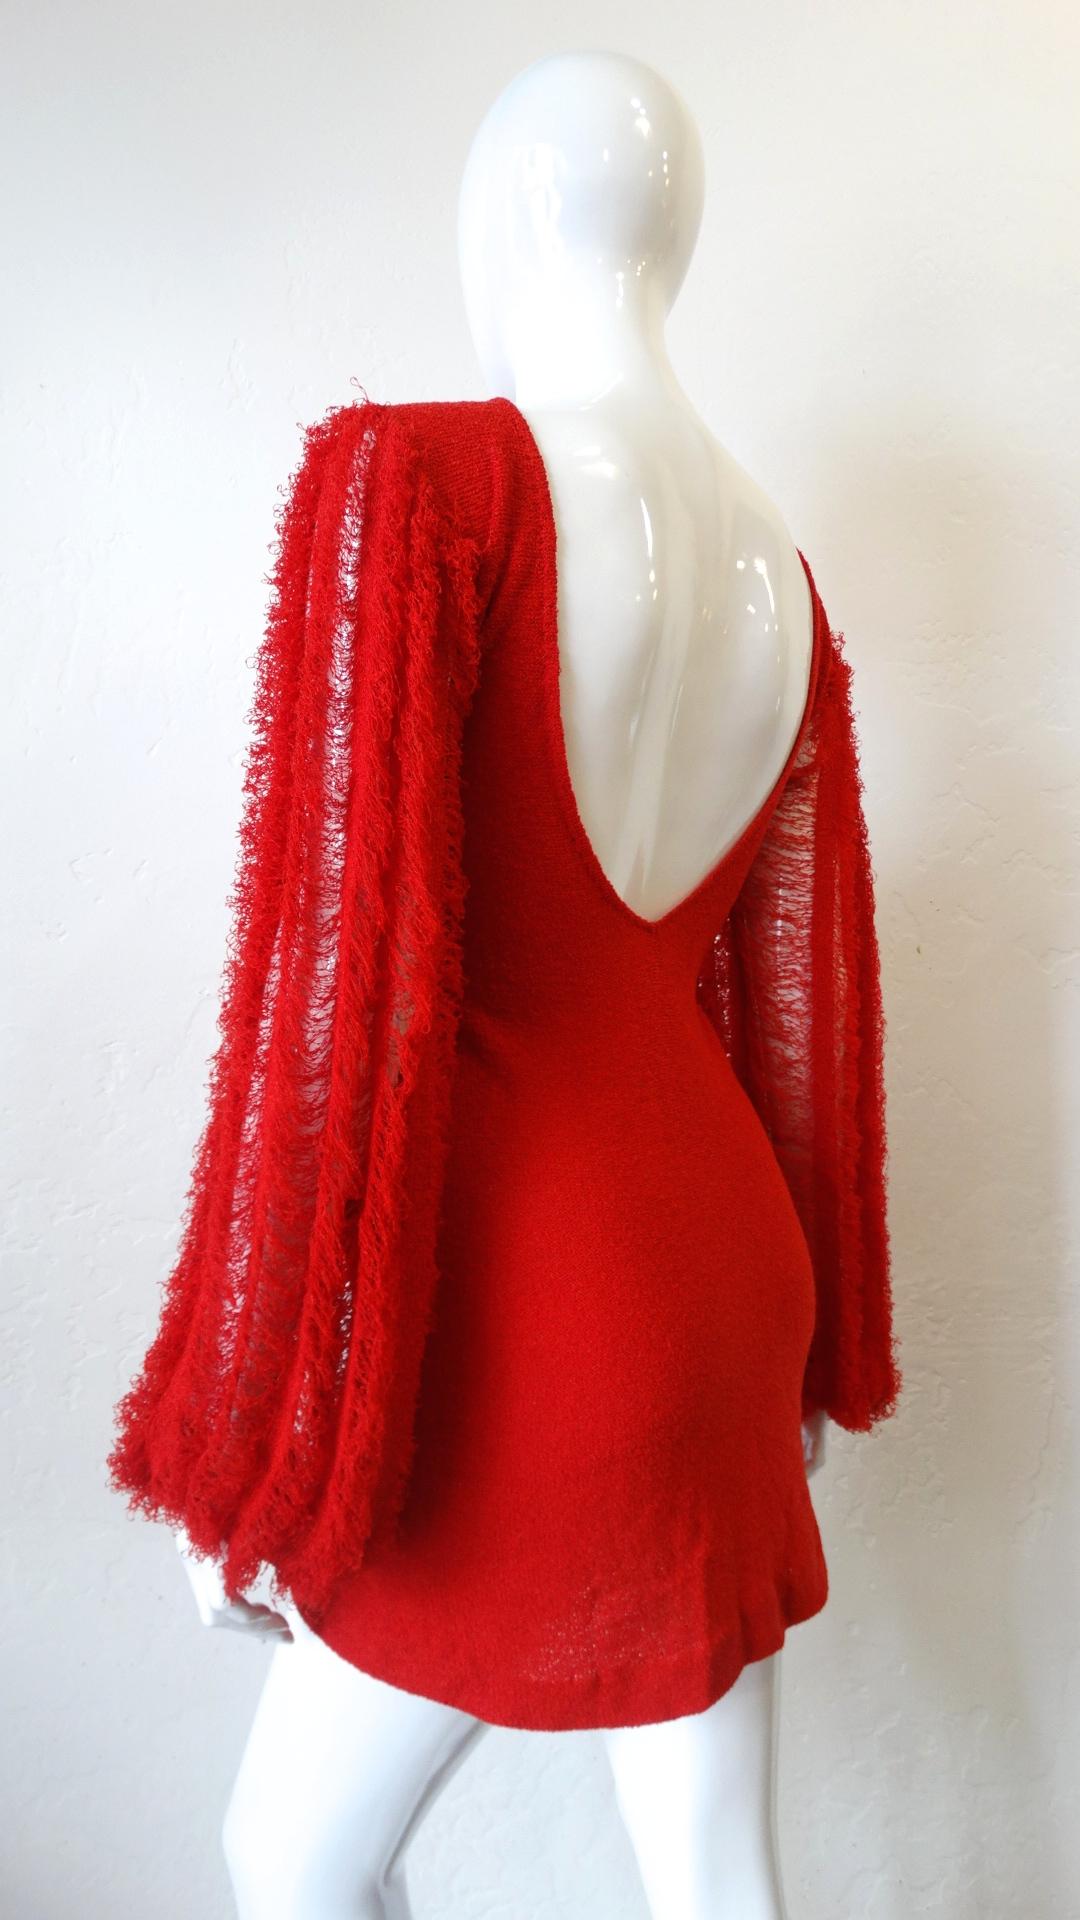 The Most Adorable Mini Dress Is Here! Circa 1980s, this knit red mini dress features a scoop neckline and shaggy dramatic bishop sleeves. The back is cut in a flattering V line. The perfect dress for a night out paired with funky shoes! Designer